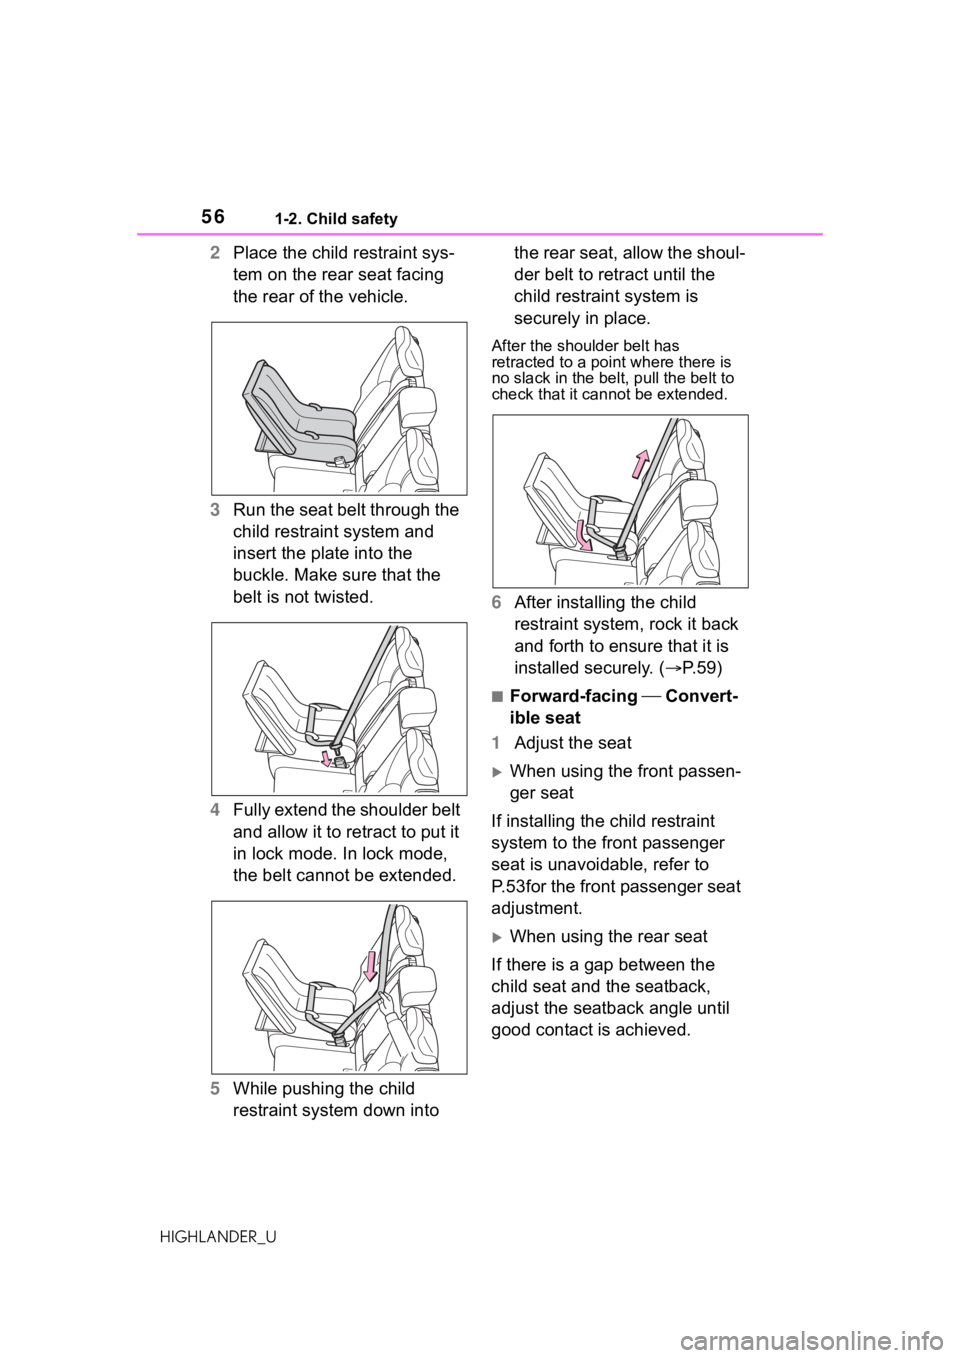 TOYOTA HIGHLANDER 2021  Owners Manual (in English) 561-2. Child safety
HIGHLANDER_U
2Place the child restraint sys-
tem on the rear seat facing 
the rear of the vehicle.
3 Run the seat belt through the 
child restraint system and 
insert the plate int